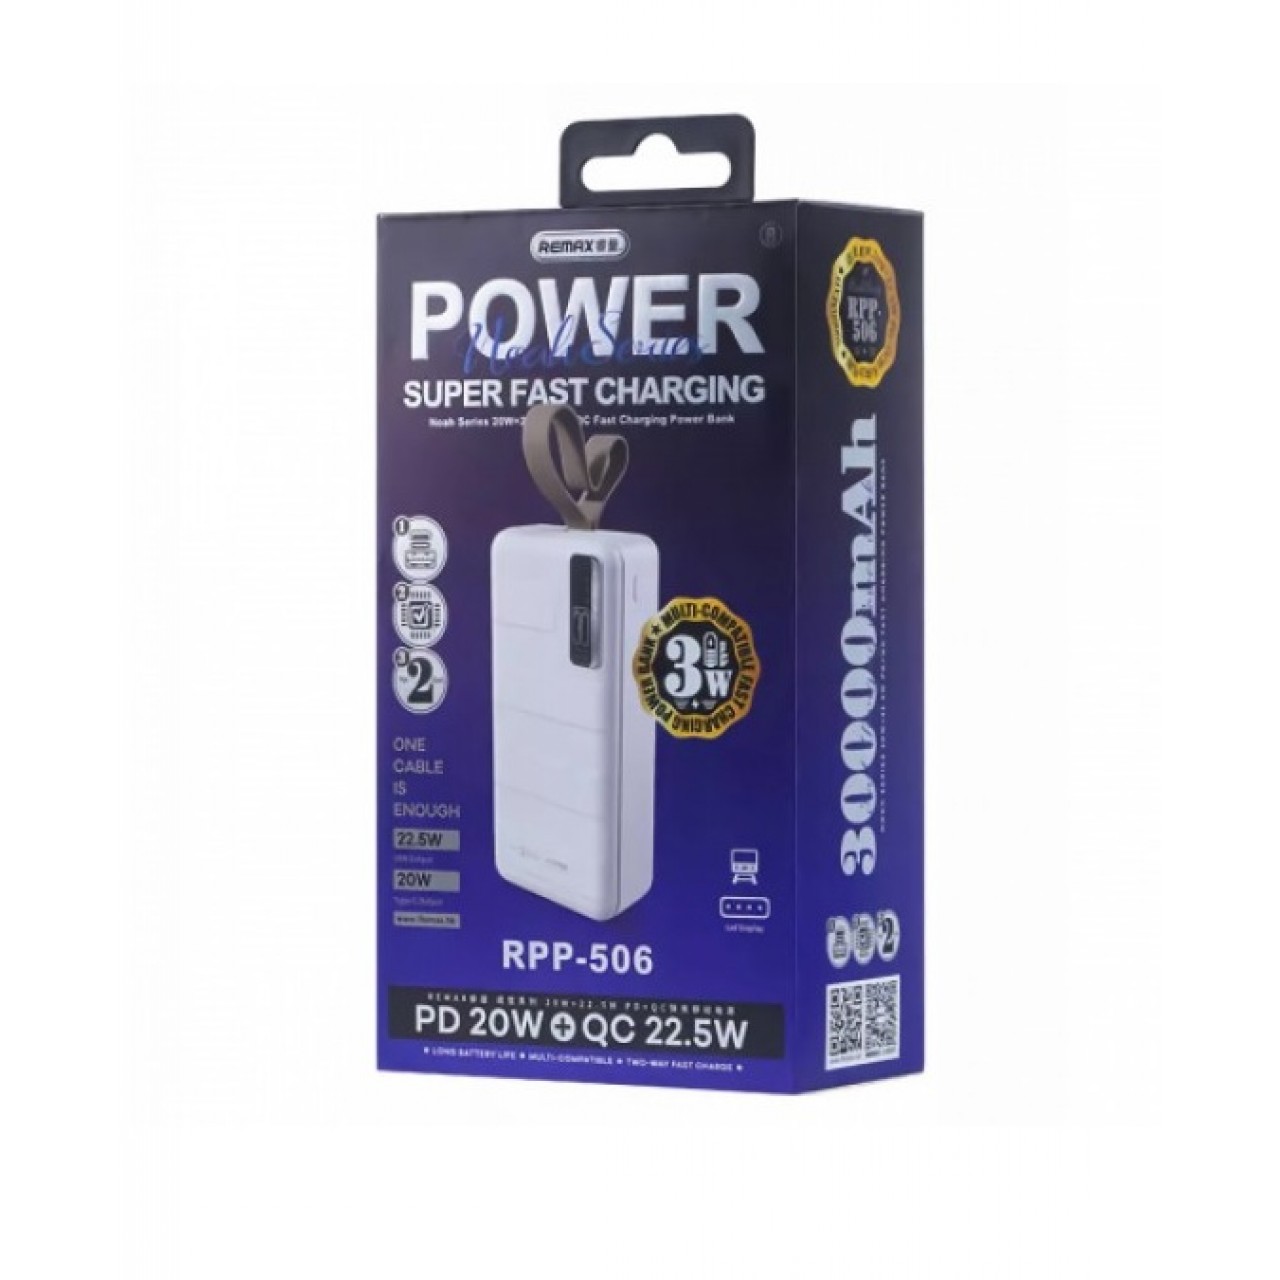 Power Bank Super Fast Charching Remax 30.000 mAh White